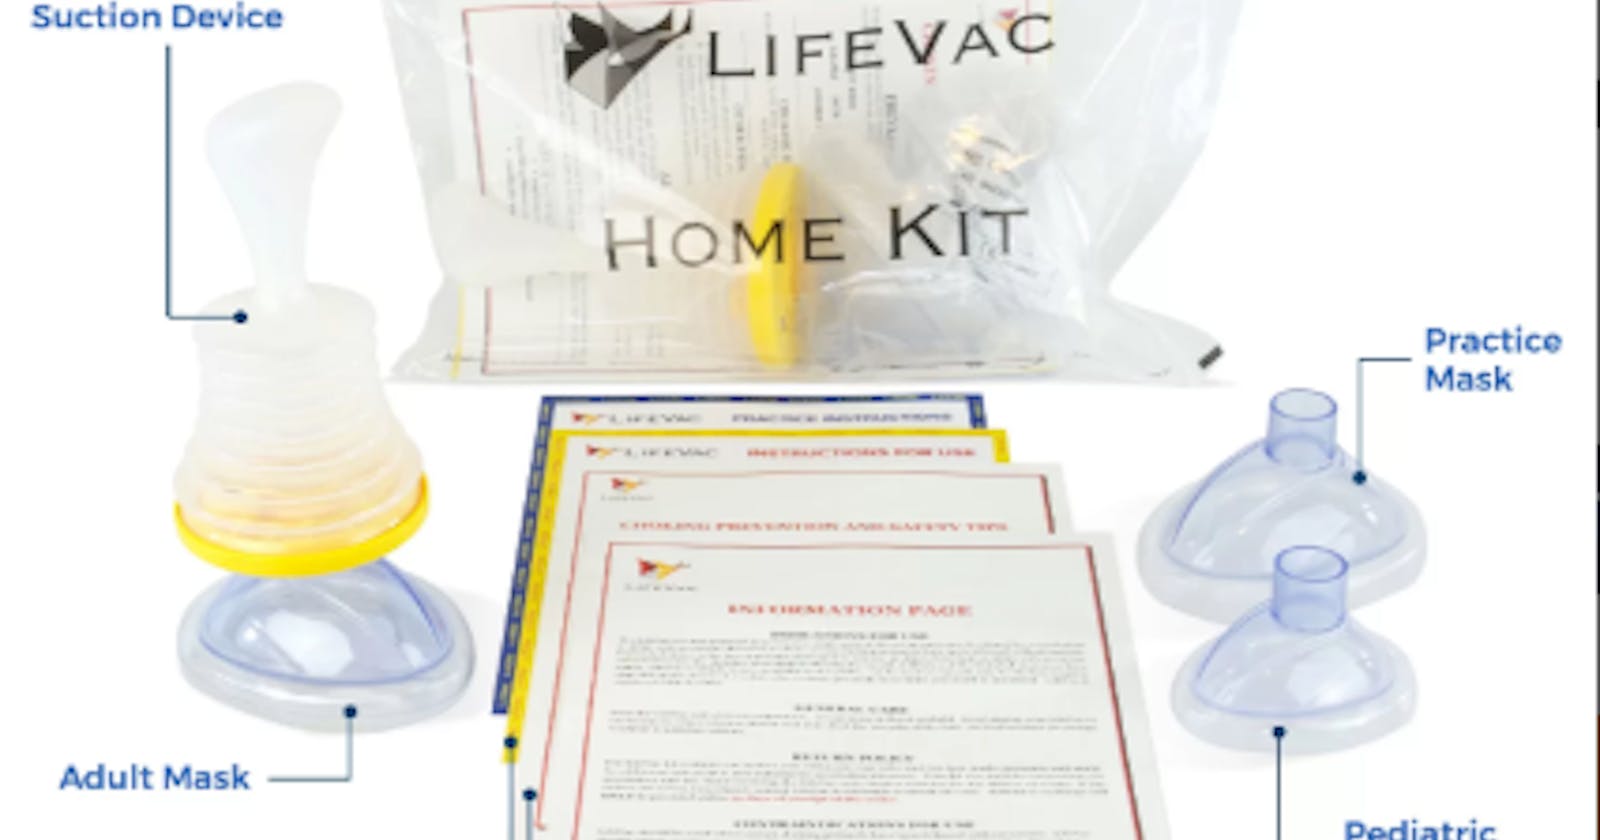 Lifevac Reviews: Is this a life-saving device to prevent choking hazards?